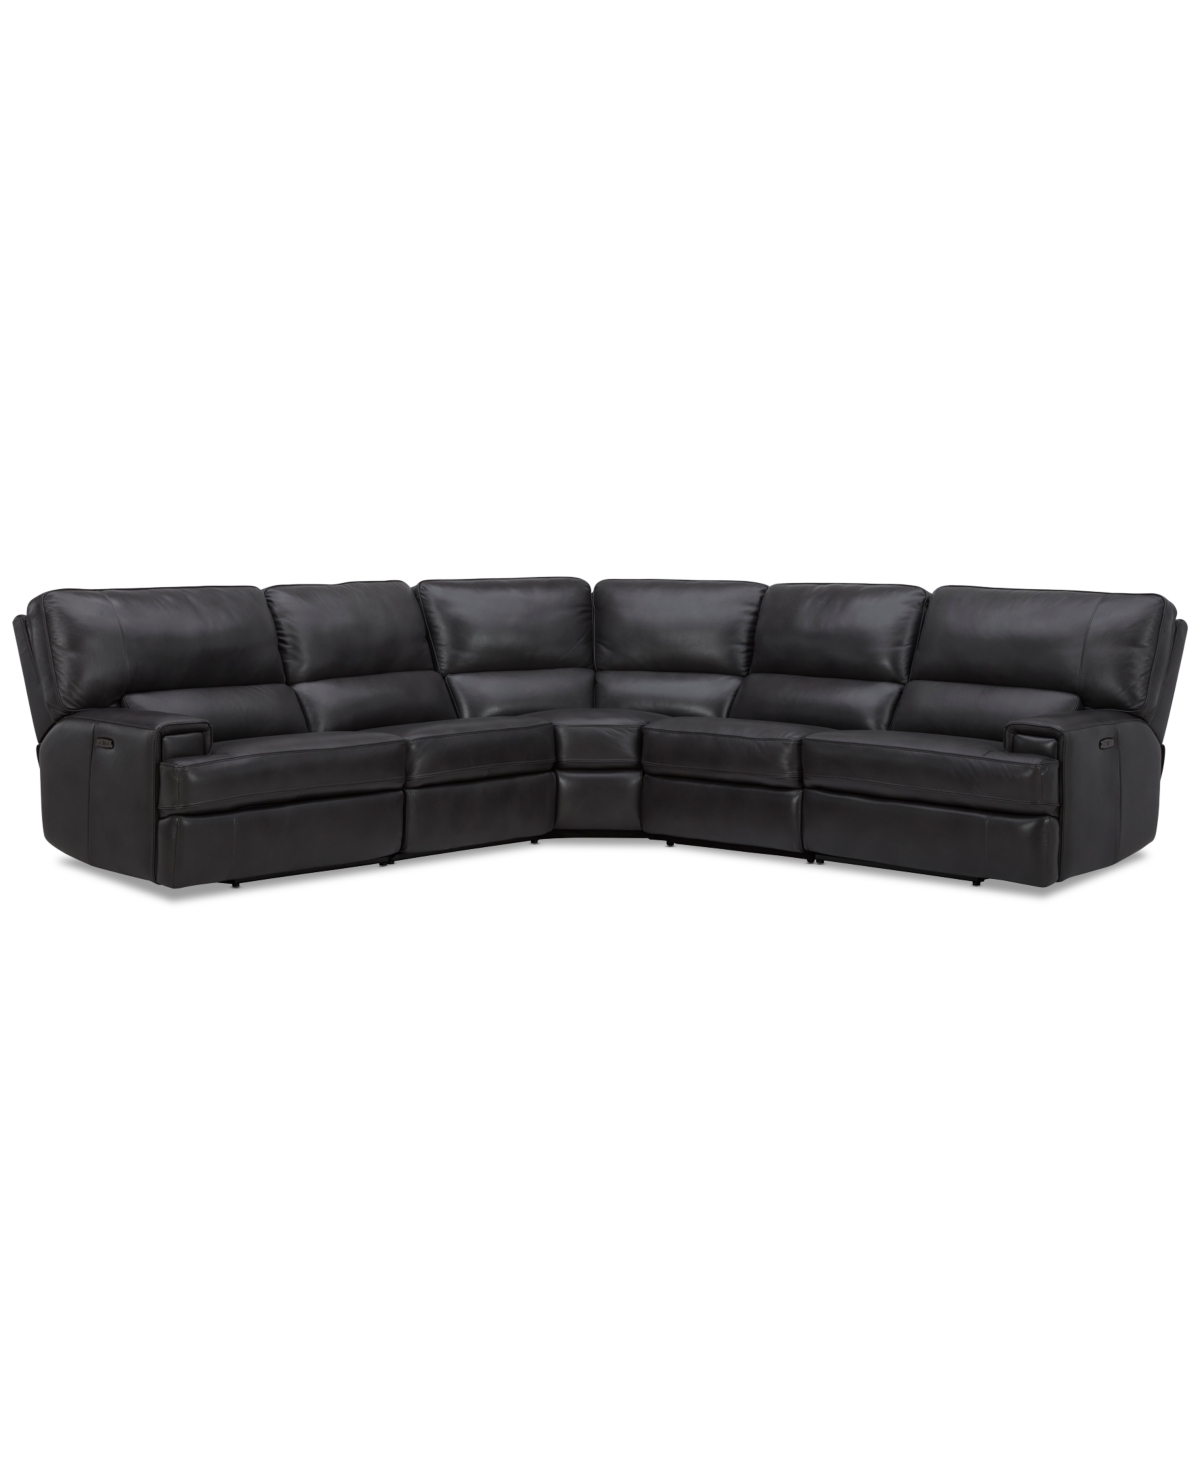 Furniture Binardo 123" 5 Pc Zero Gravity Leather Sectional With 3 Power Recliners, Created For Macy's In Charcoal